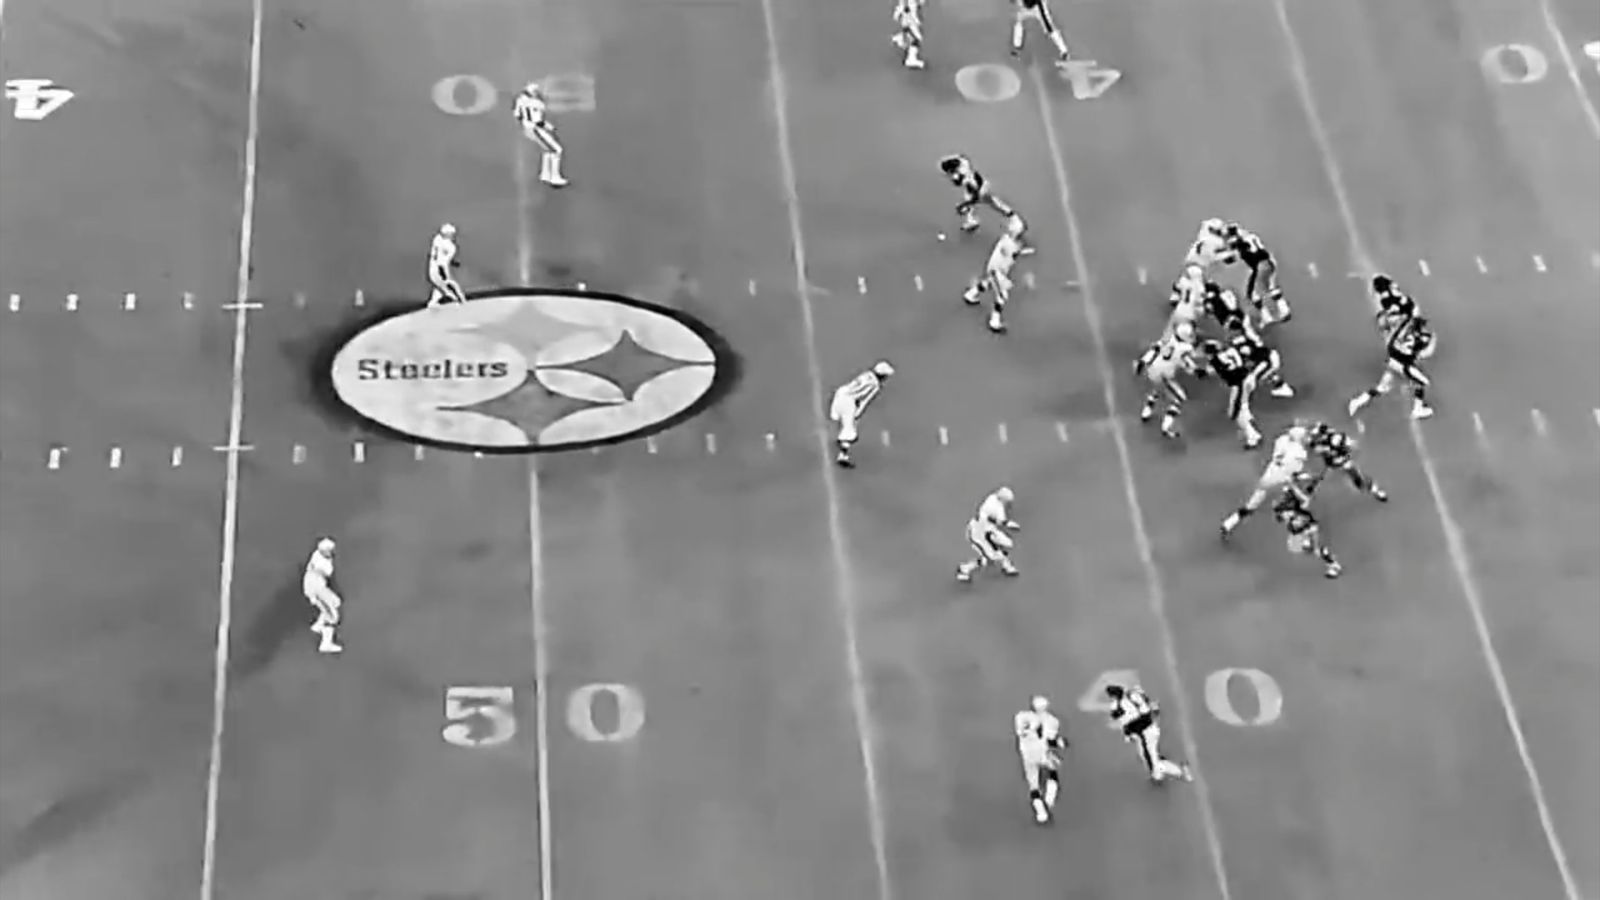 immaculate reception gif